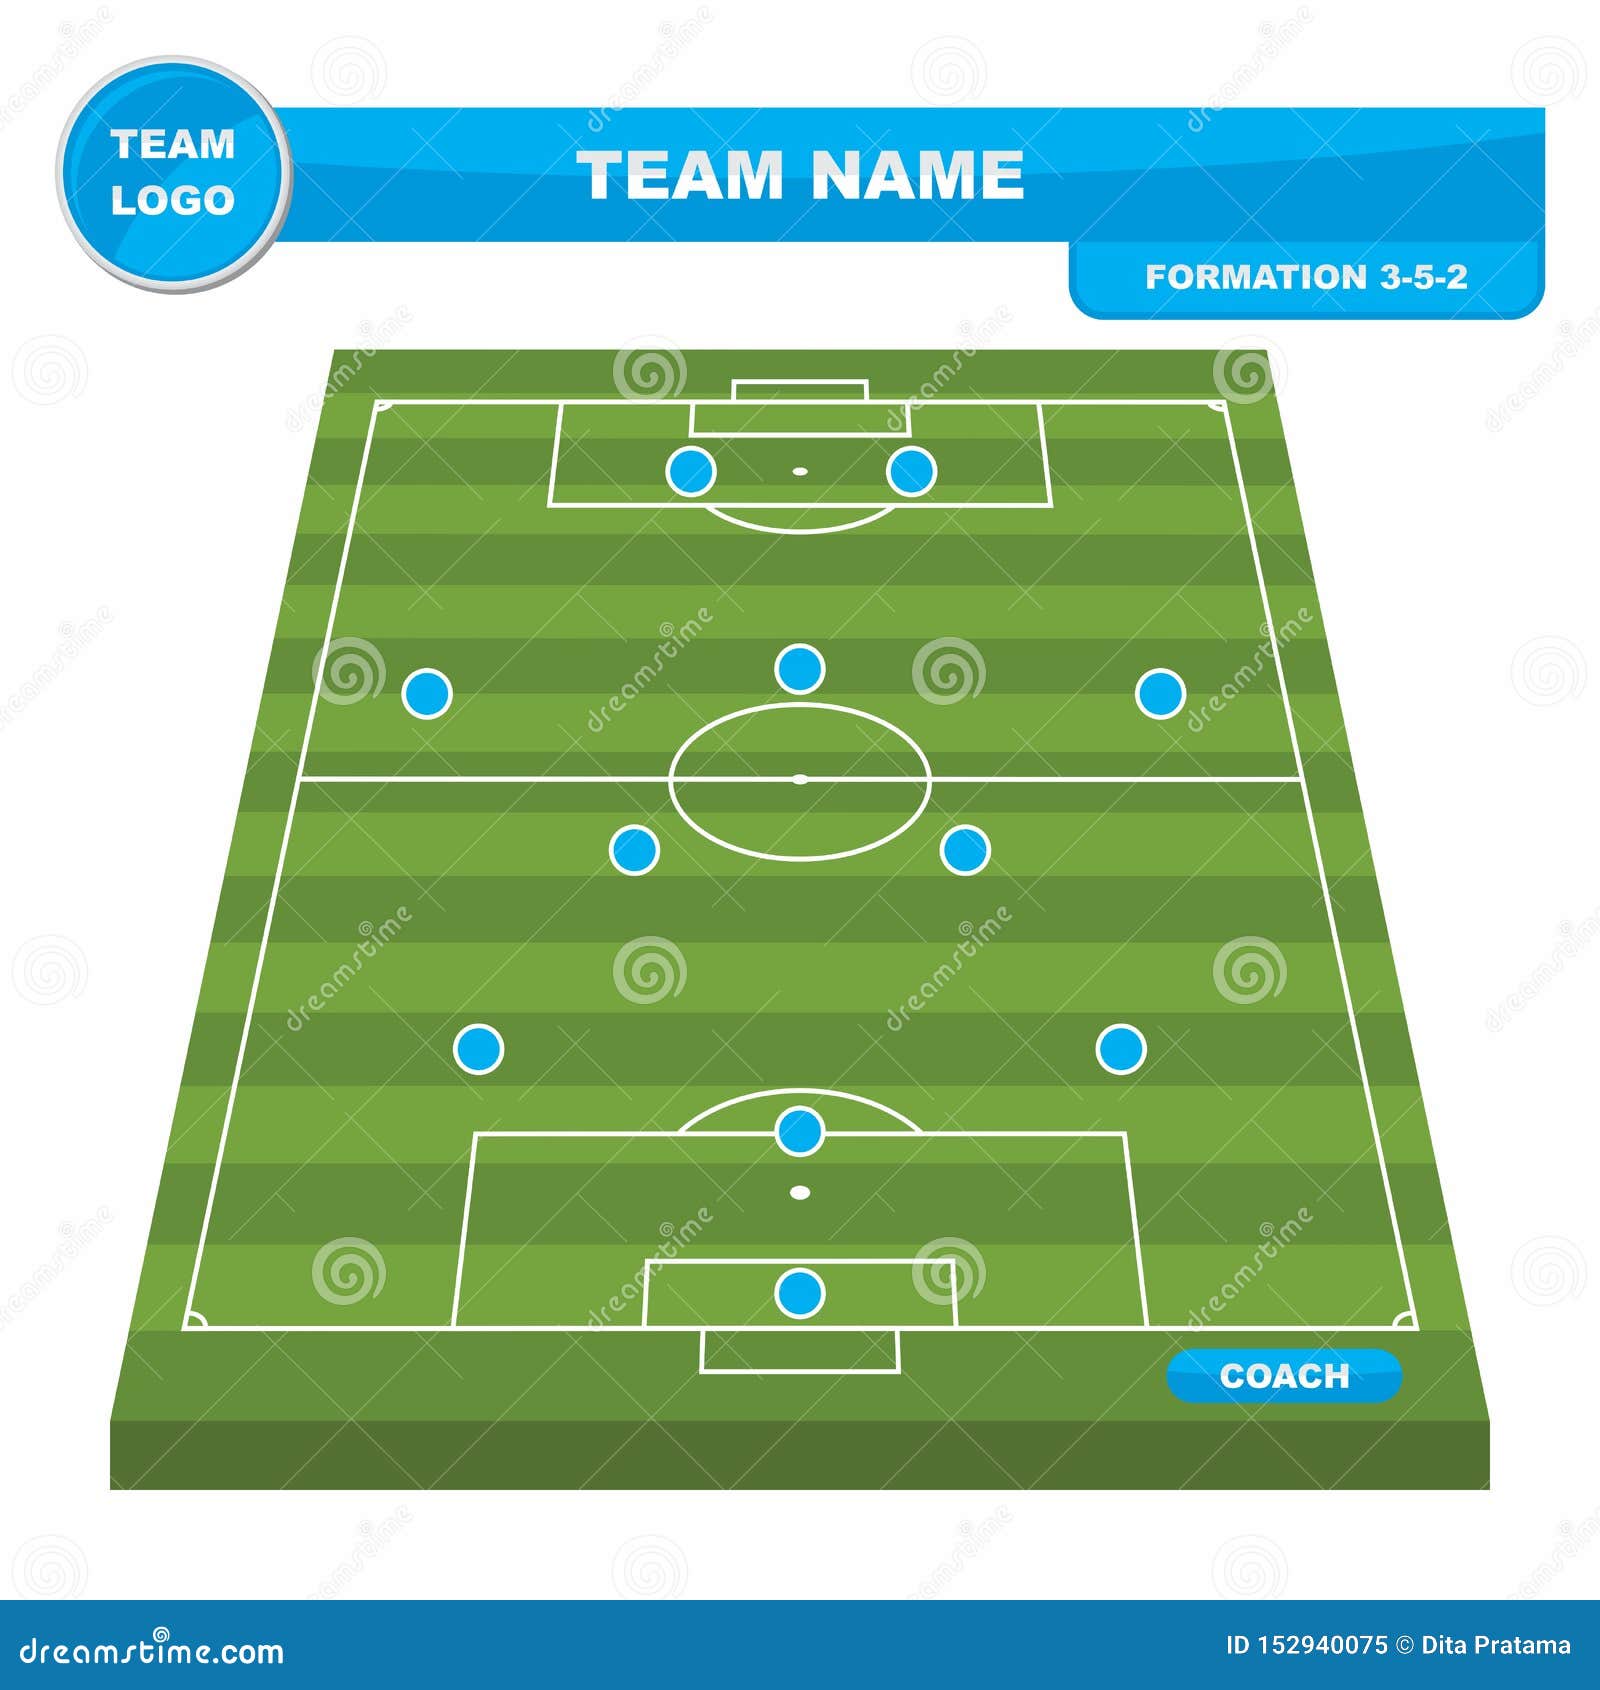 football-soccer-formation-strategy-template-with-perspective-field-3-5